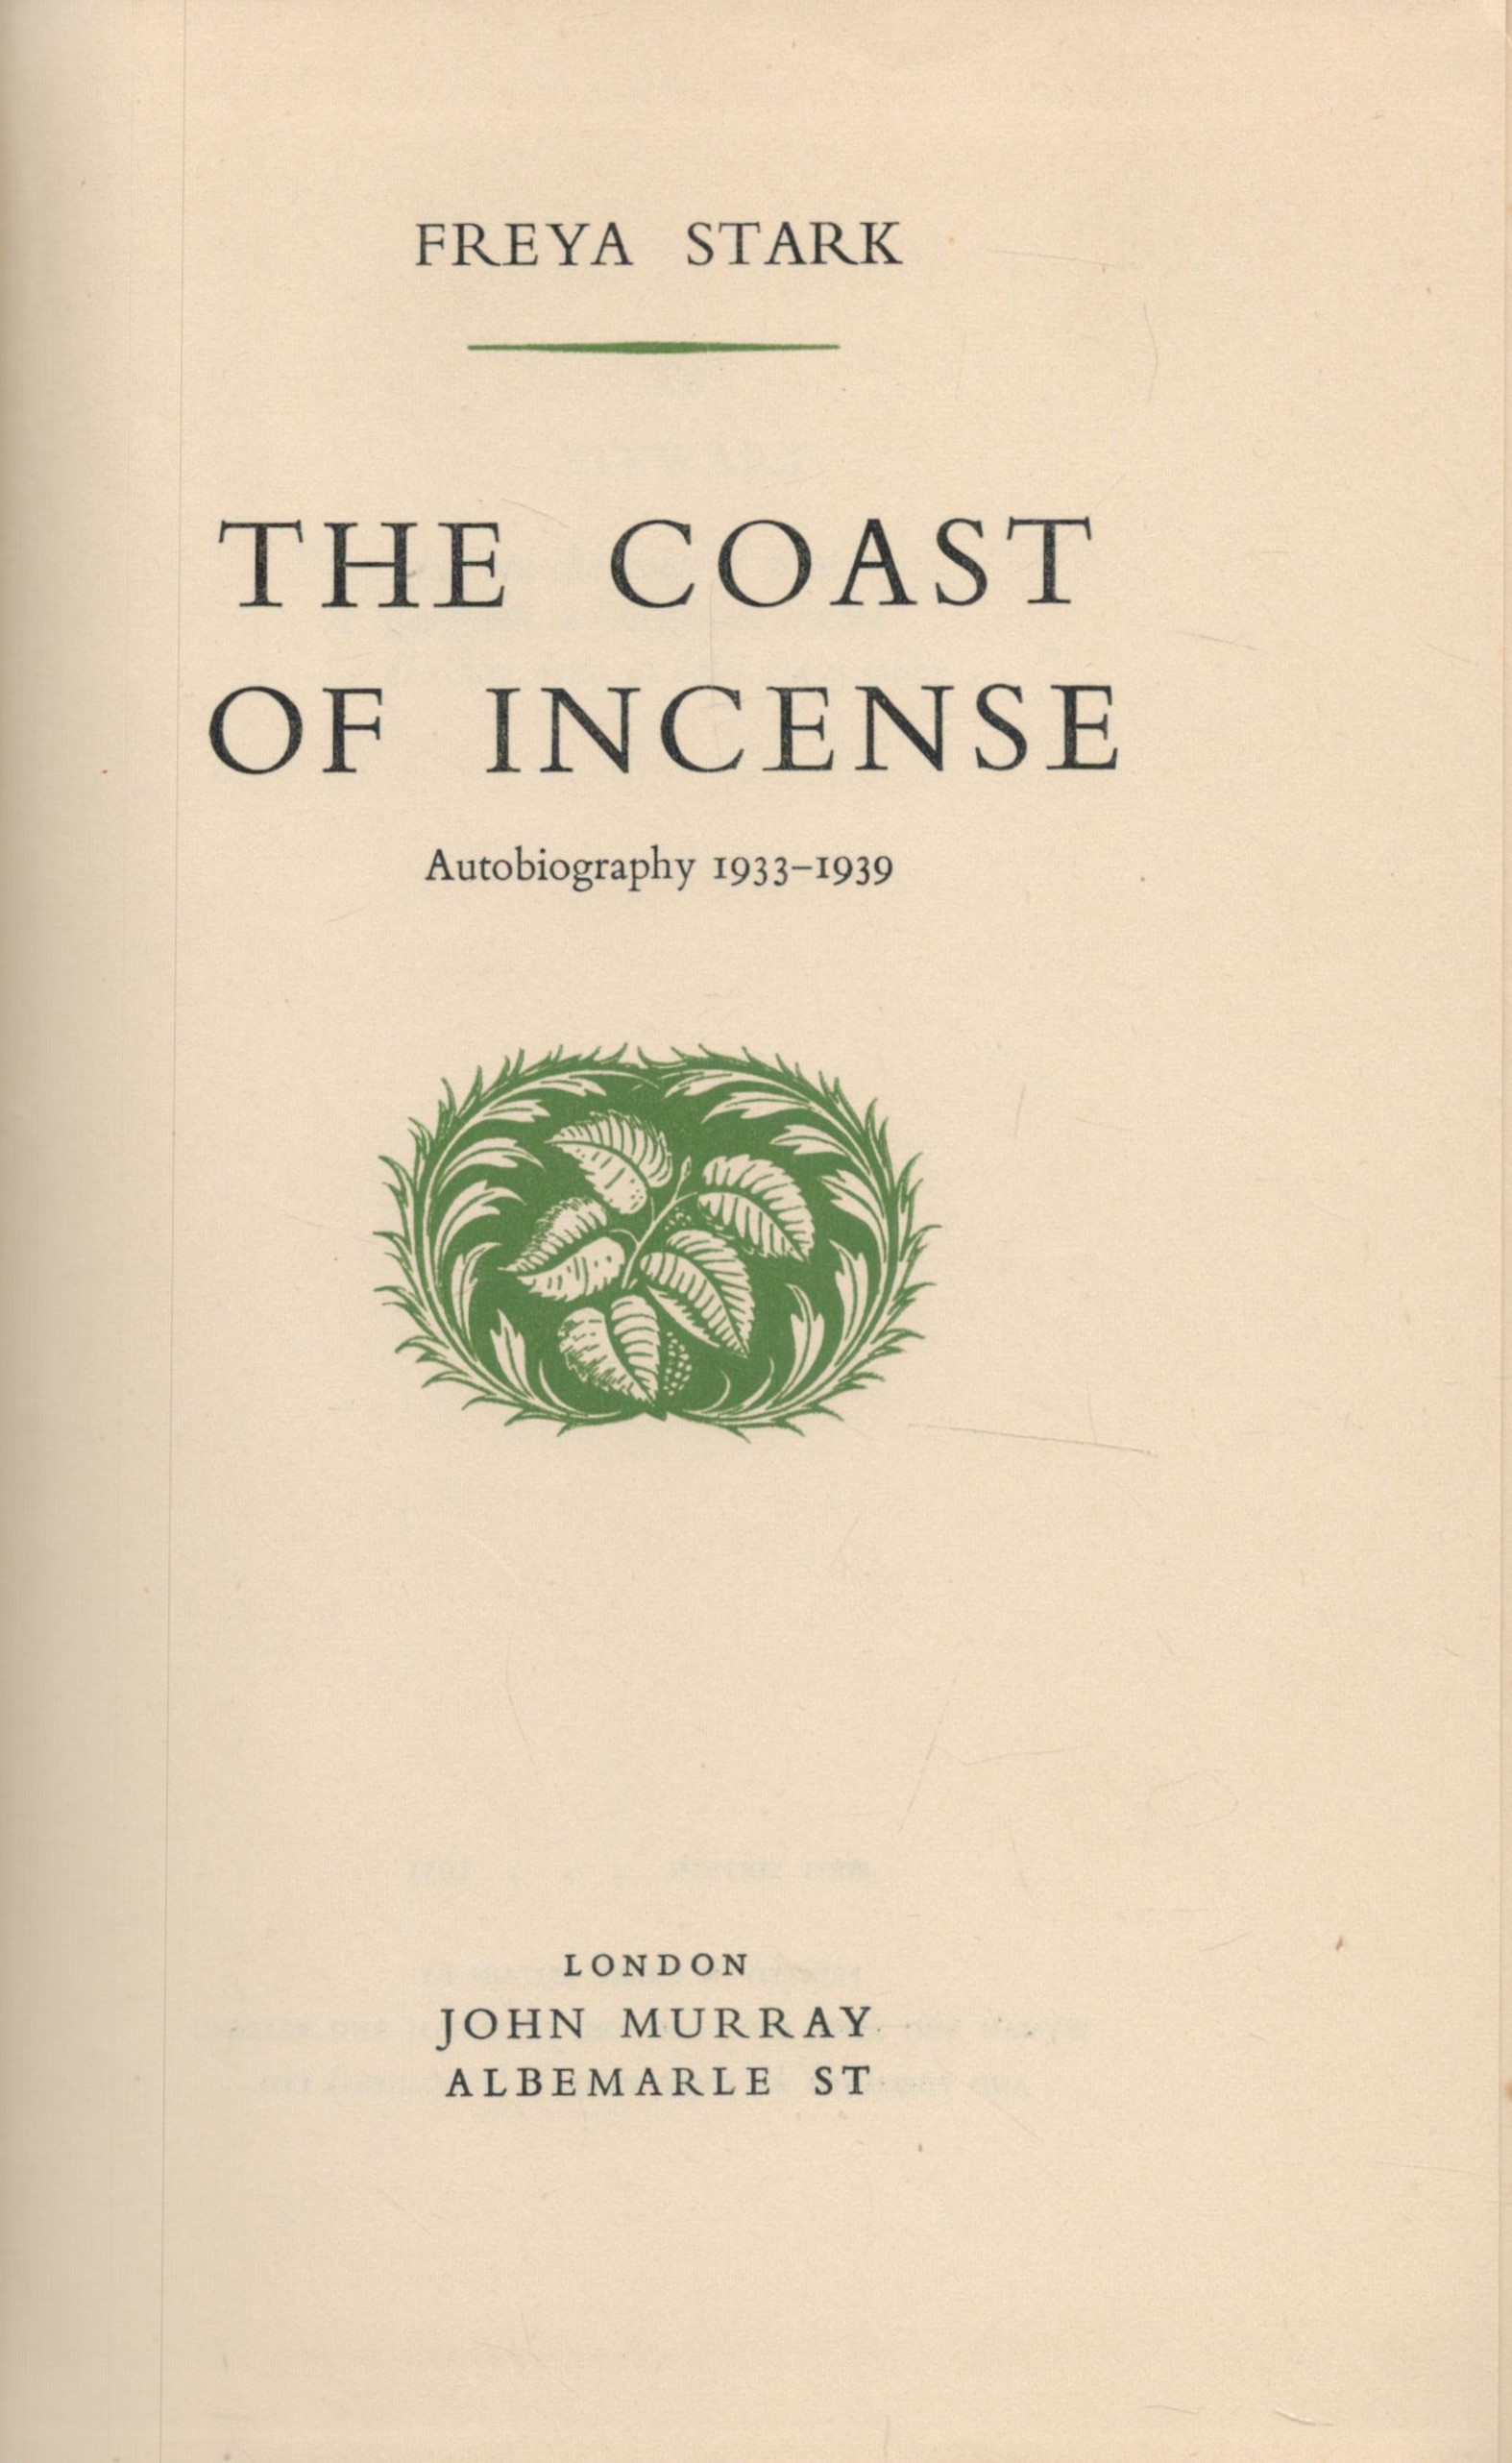 Freya Stark The Coast of Incense. Autobiography 1933-1939. Published by John Murray. London. 1953. - Image 2 of 3